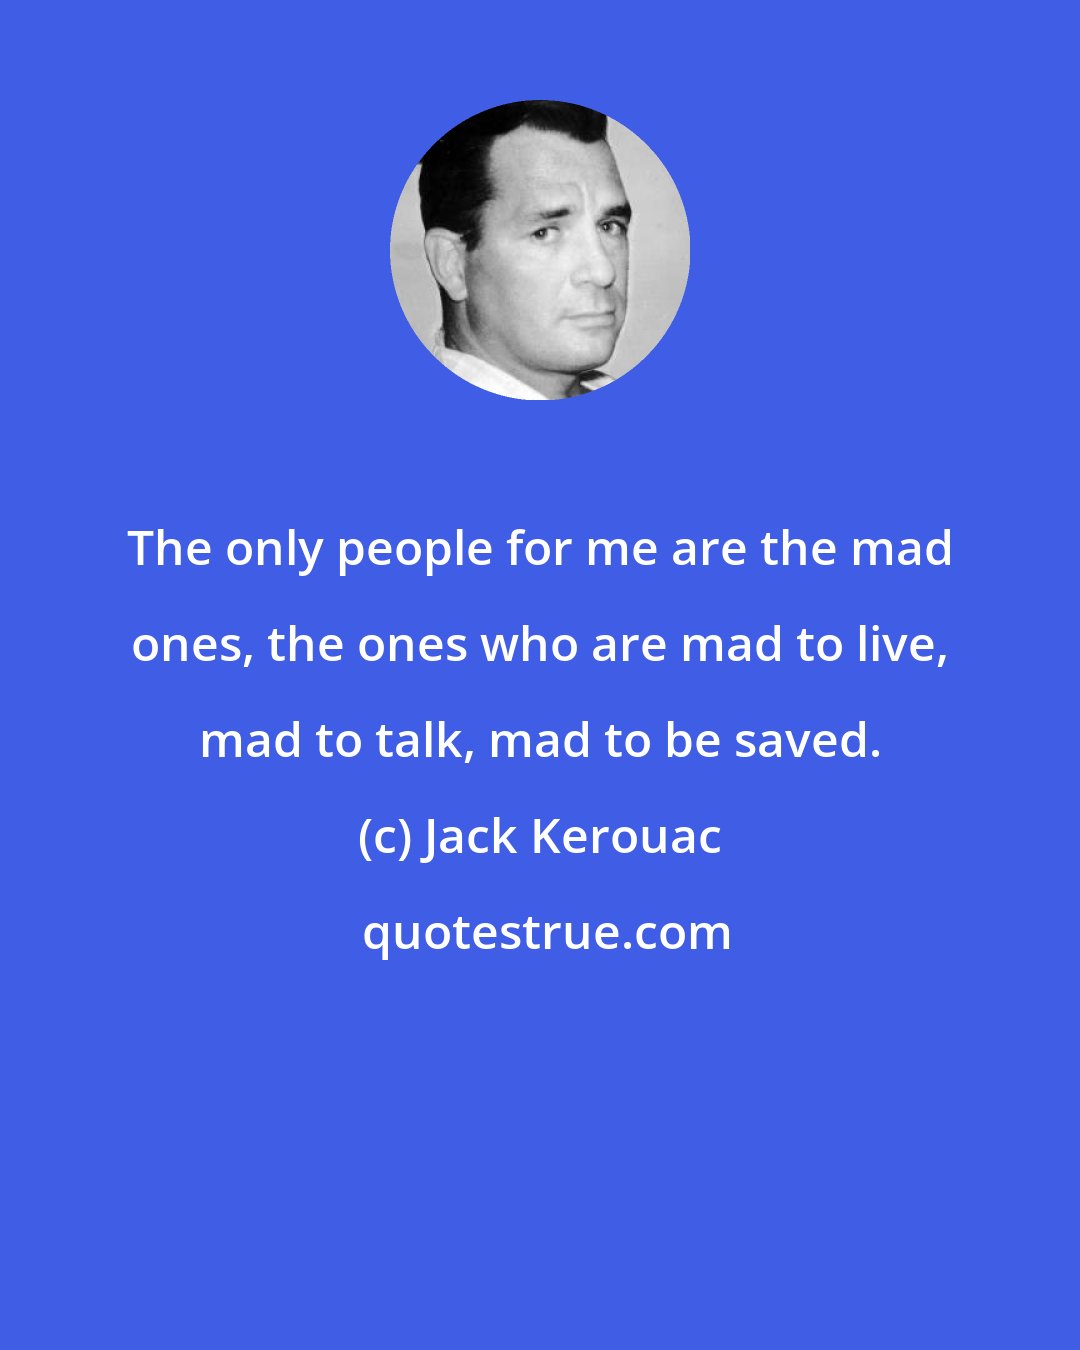 Jack Kerouac: The only people for me are the mad ones, the ones who are mad to live, mad to talk, mad to be saved.